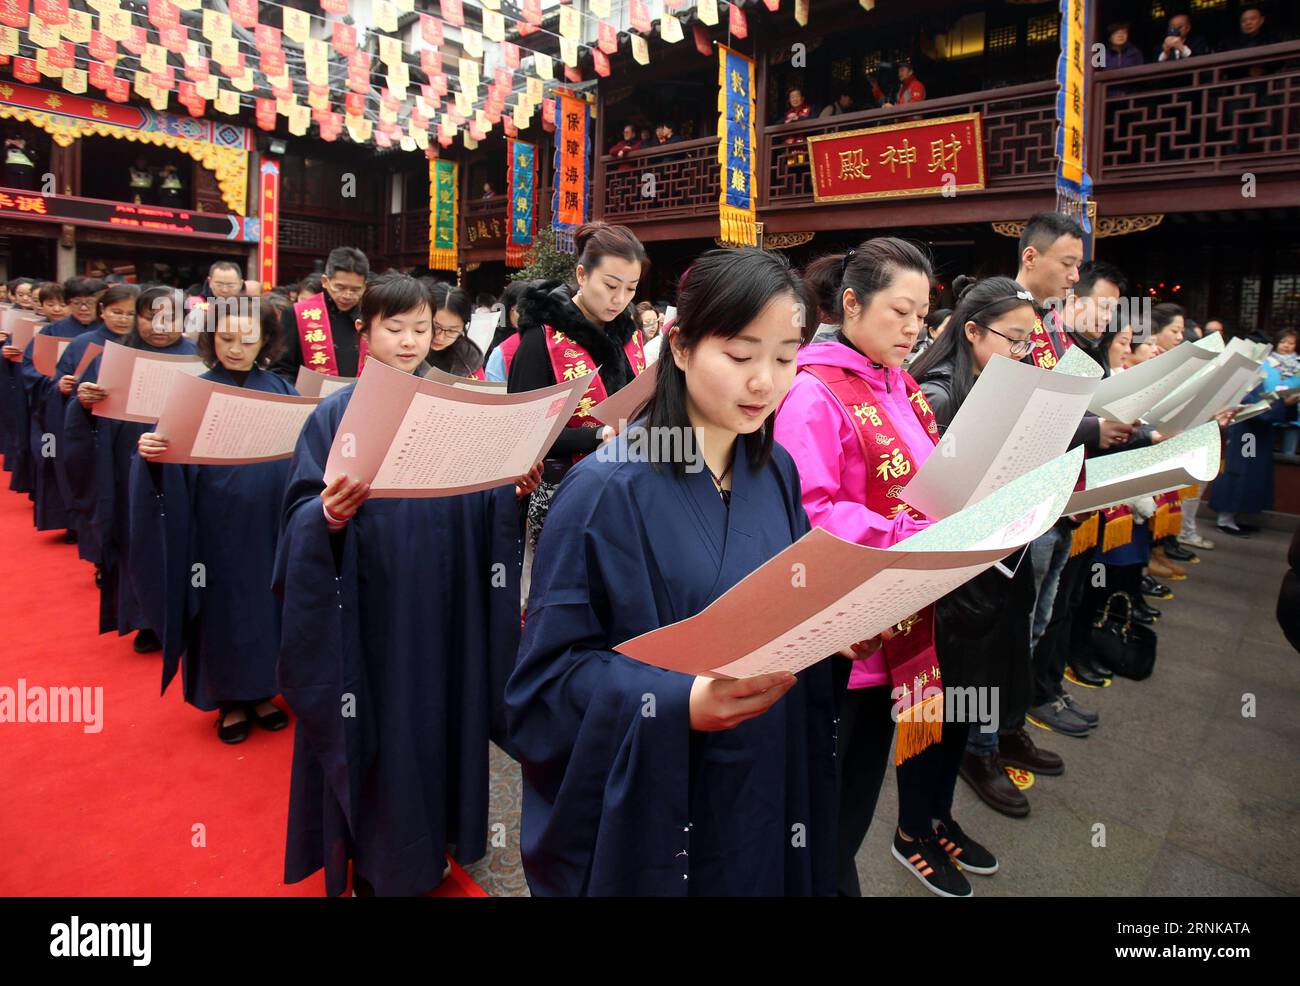 (170318) -- SHANGHAI March 18, 2017 -- A ceremony is held in the Chenghuang temple (The City Temple of Shanghai) wishing for city s prosperity in Shanghai, east China, March 18, 2017. ) (zyd) CHINA-SHANGHAI-CHENGHUANG-CEREMONY (CN) LiuxYing PUBLICATIONxNOTxINxCHN   Shanghai March 18 2017 a Ceremony IS Hero in The Cheng Huang Temple The City Temple of Shanghai Wishing for City S Prosperity in Shanghai East China March 18 2017 ZYD China Shanghai Cheng Huang Ceremony CN LiuxYing PUBLICATIONxNOTxINxCHN Stock Photo